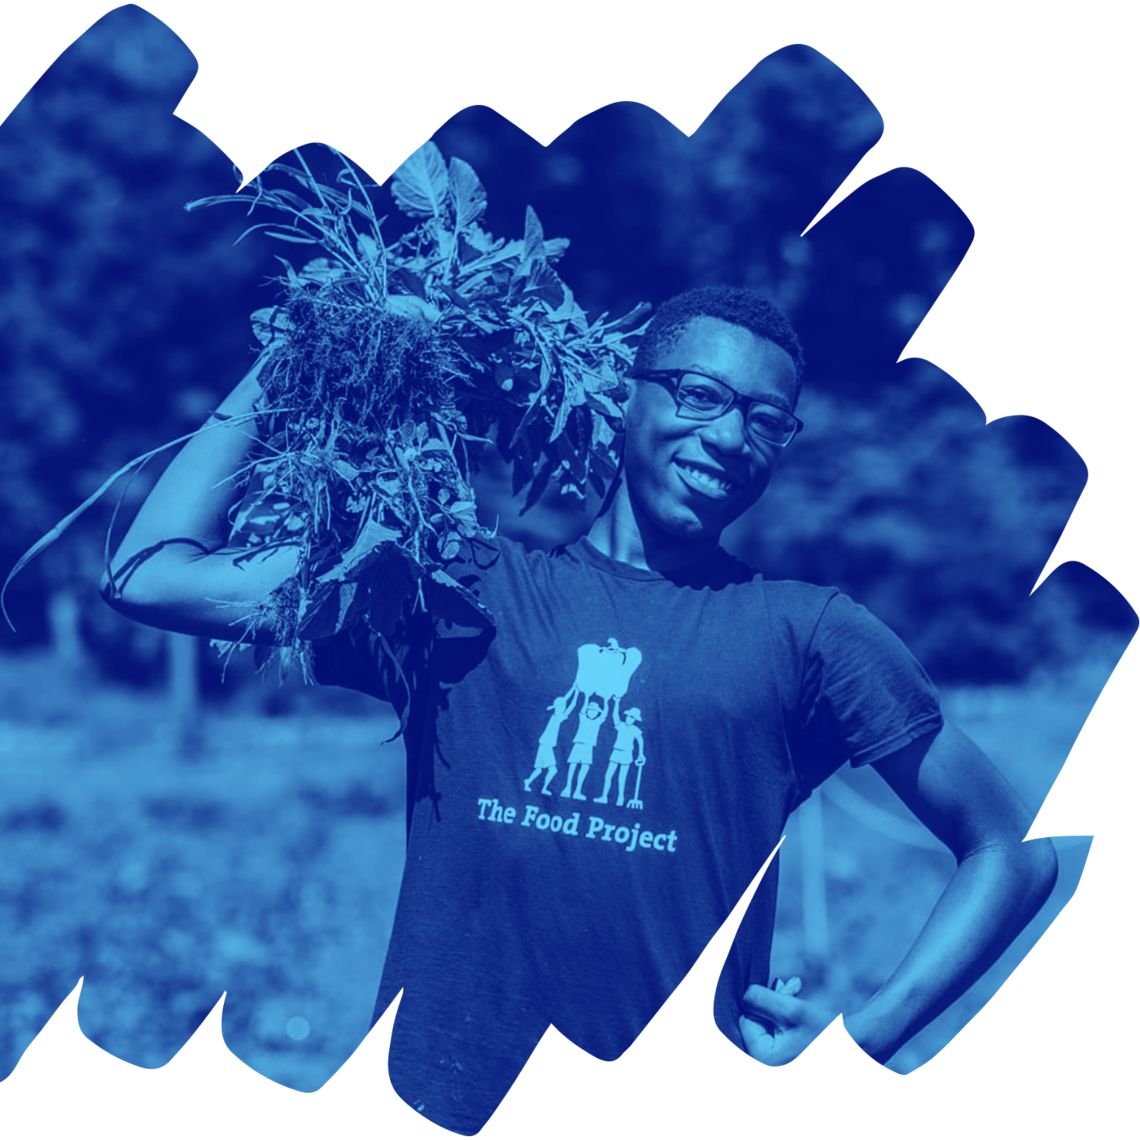 Image of a person with glasses holding harvested greens over their shoulder. Their other arm is bent with the hand making a fist against their hip. They are standing in a garden and smiling towards the camera.